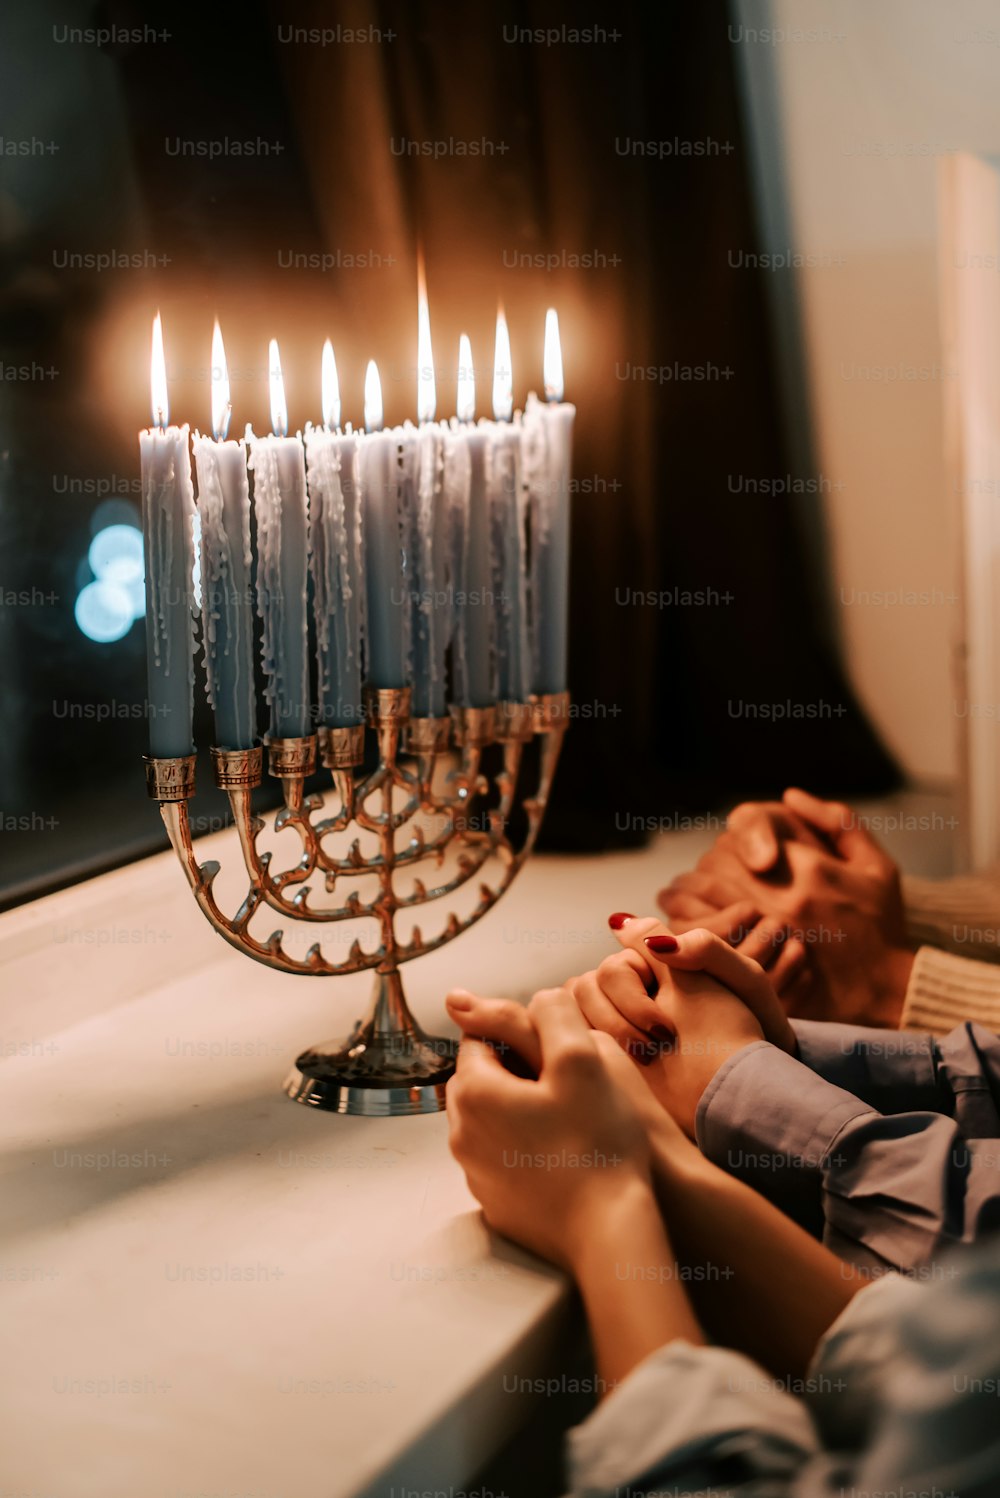 a person sitting in front of a lit menorah